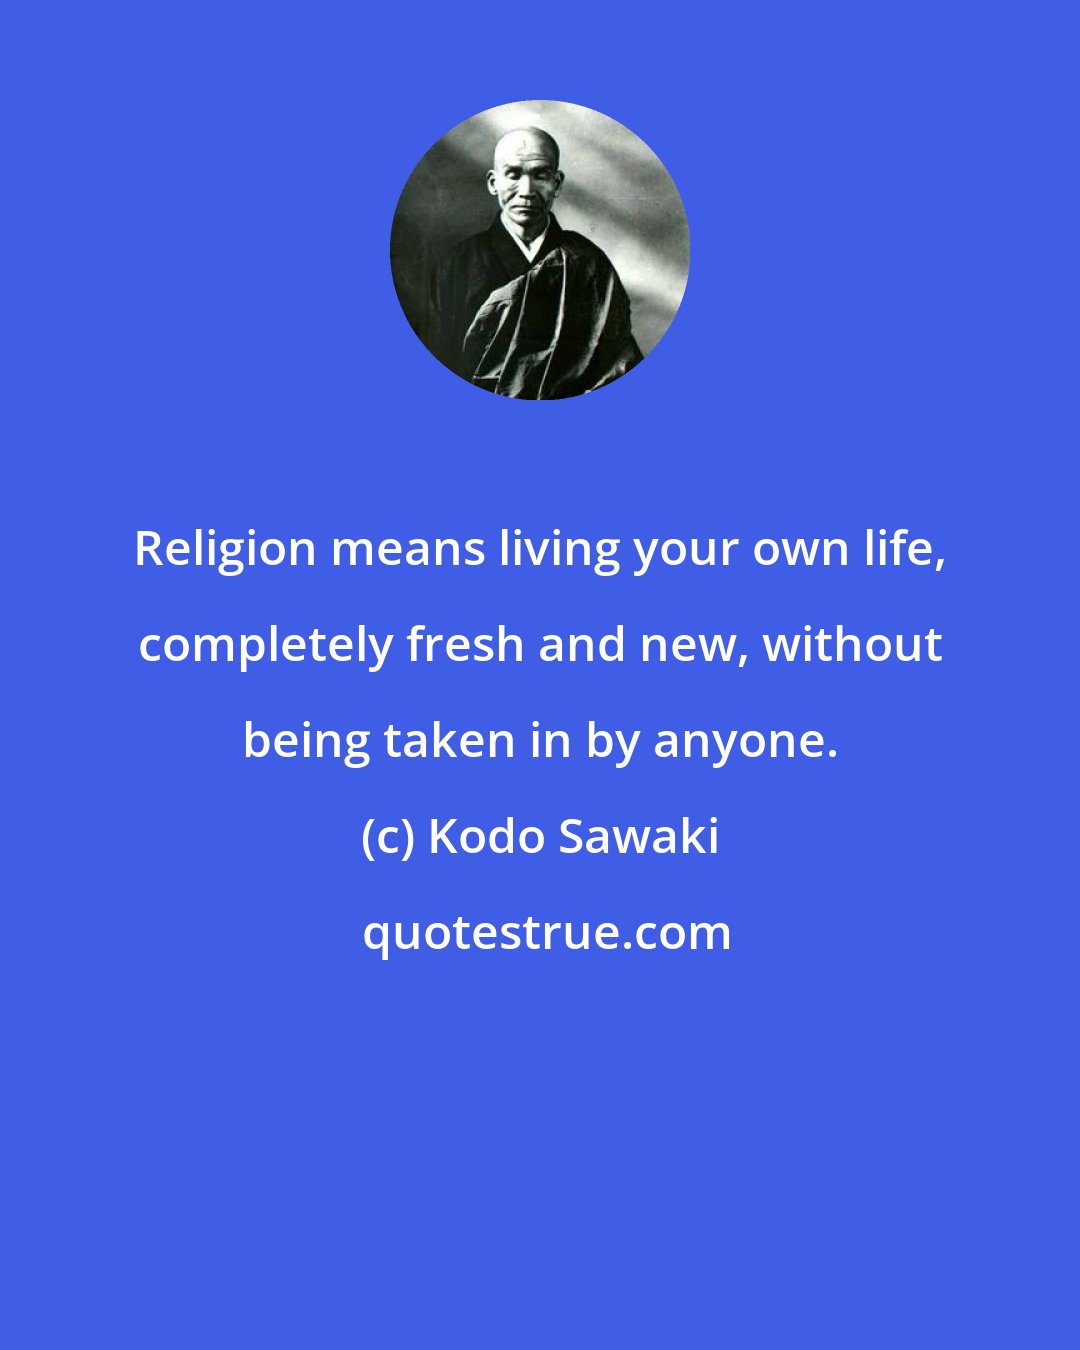 Kodo Sawaki: Religion means living your own life, completely fresh and new, without being taken in by anyone.